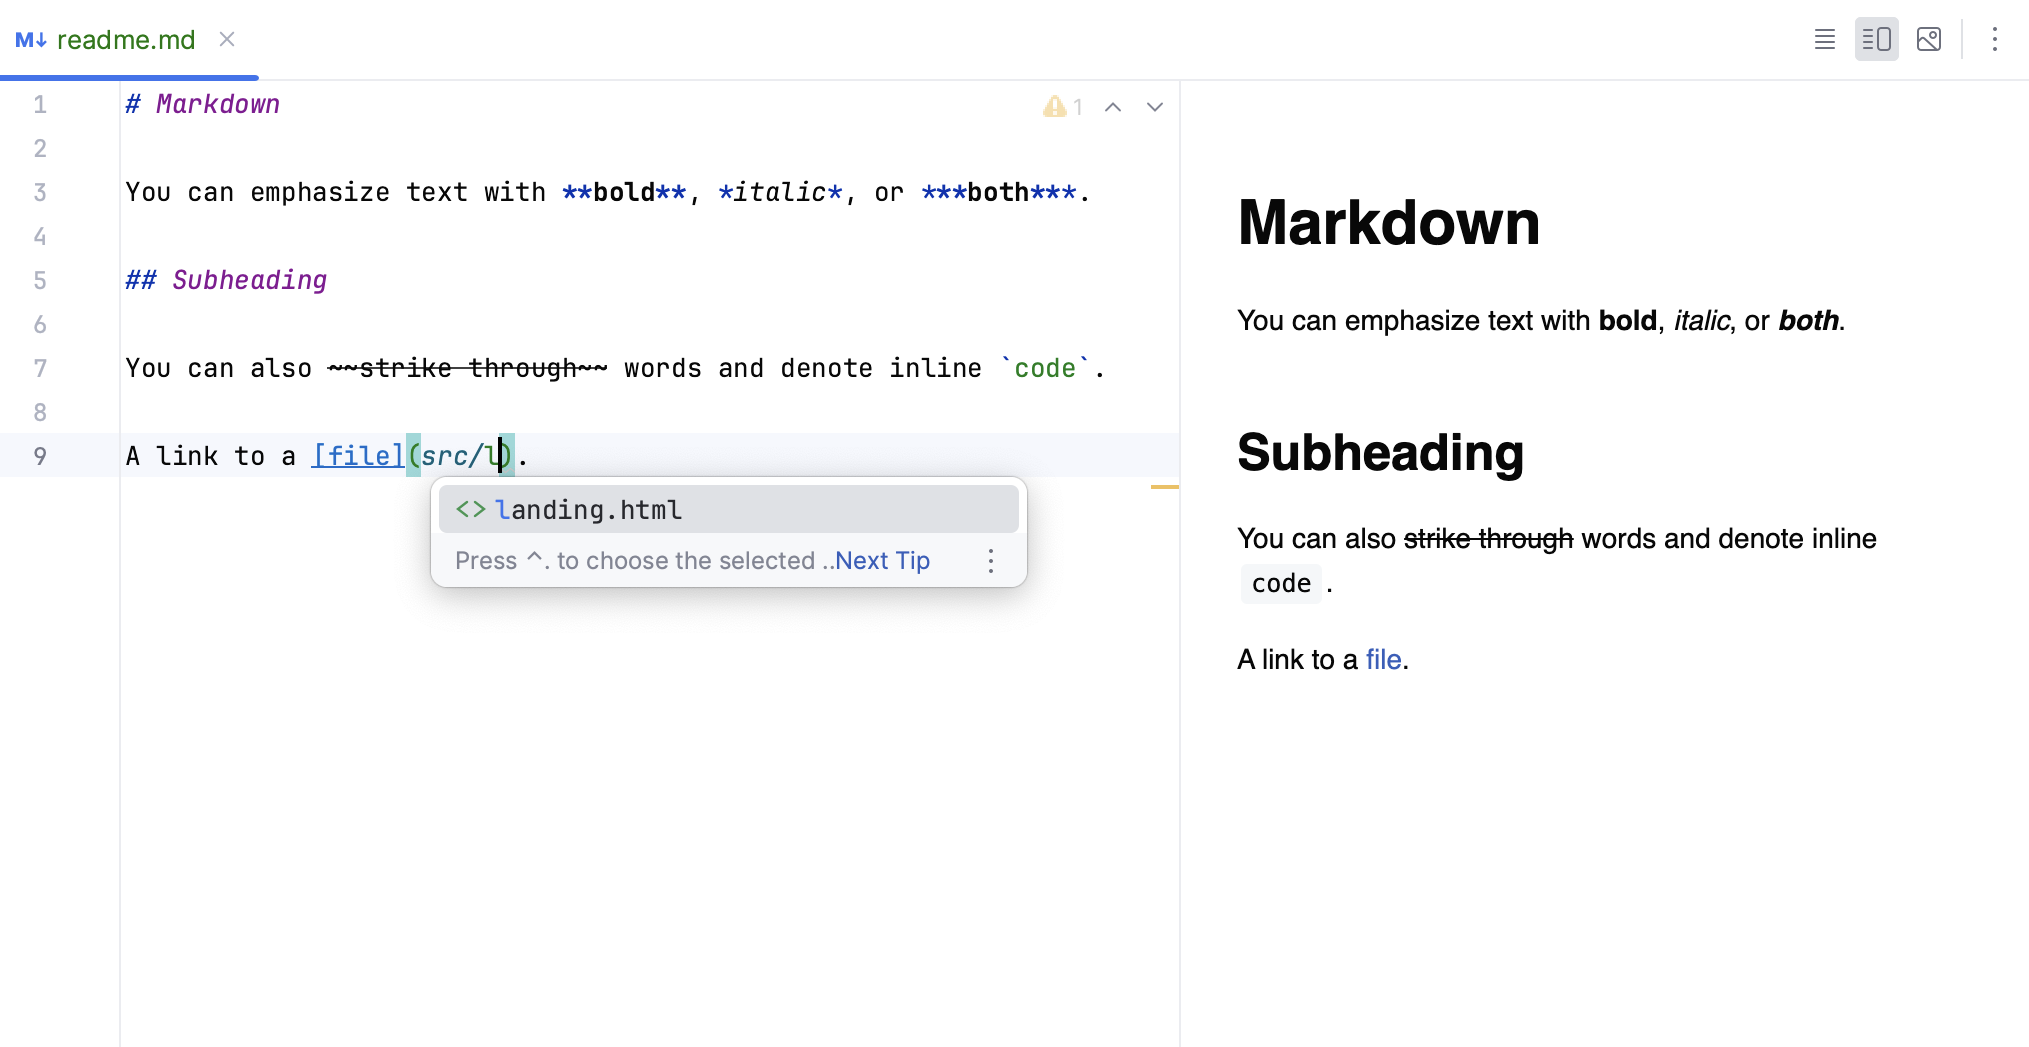 Markdown editor completion popup